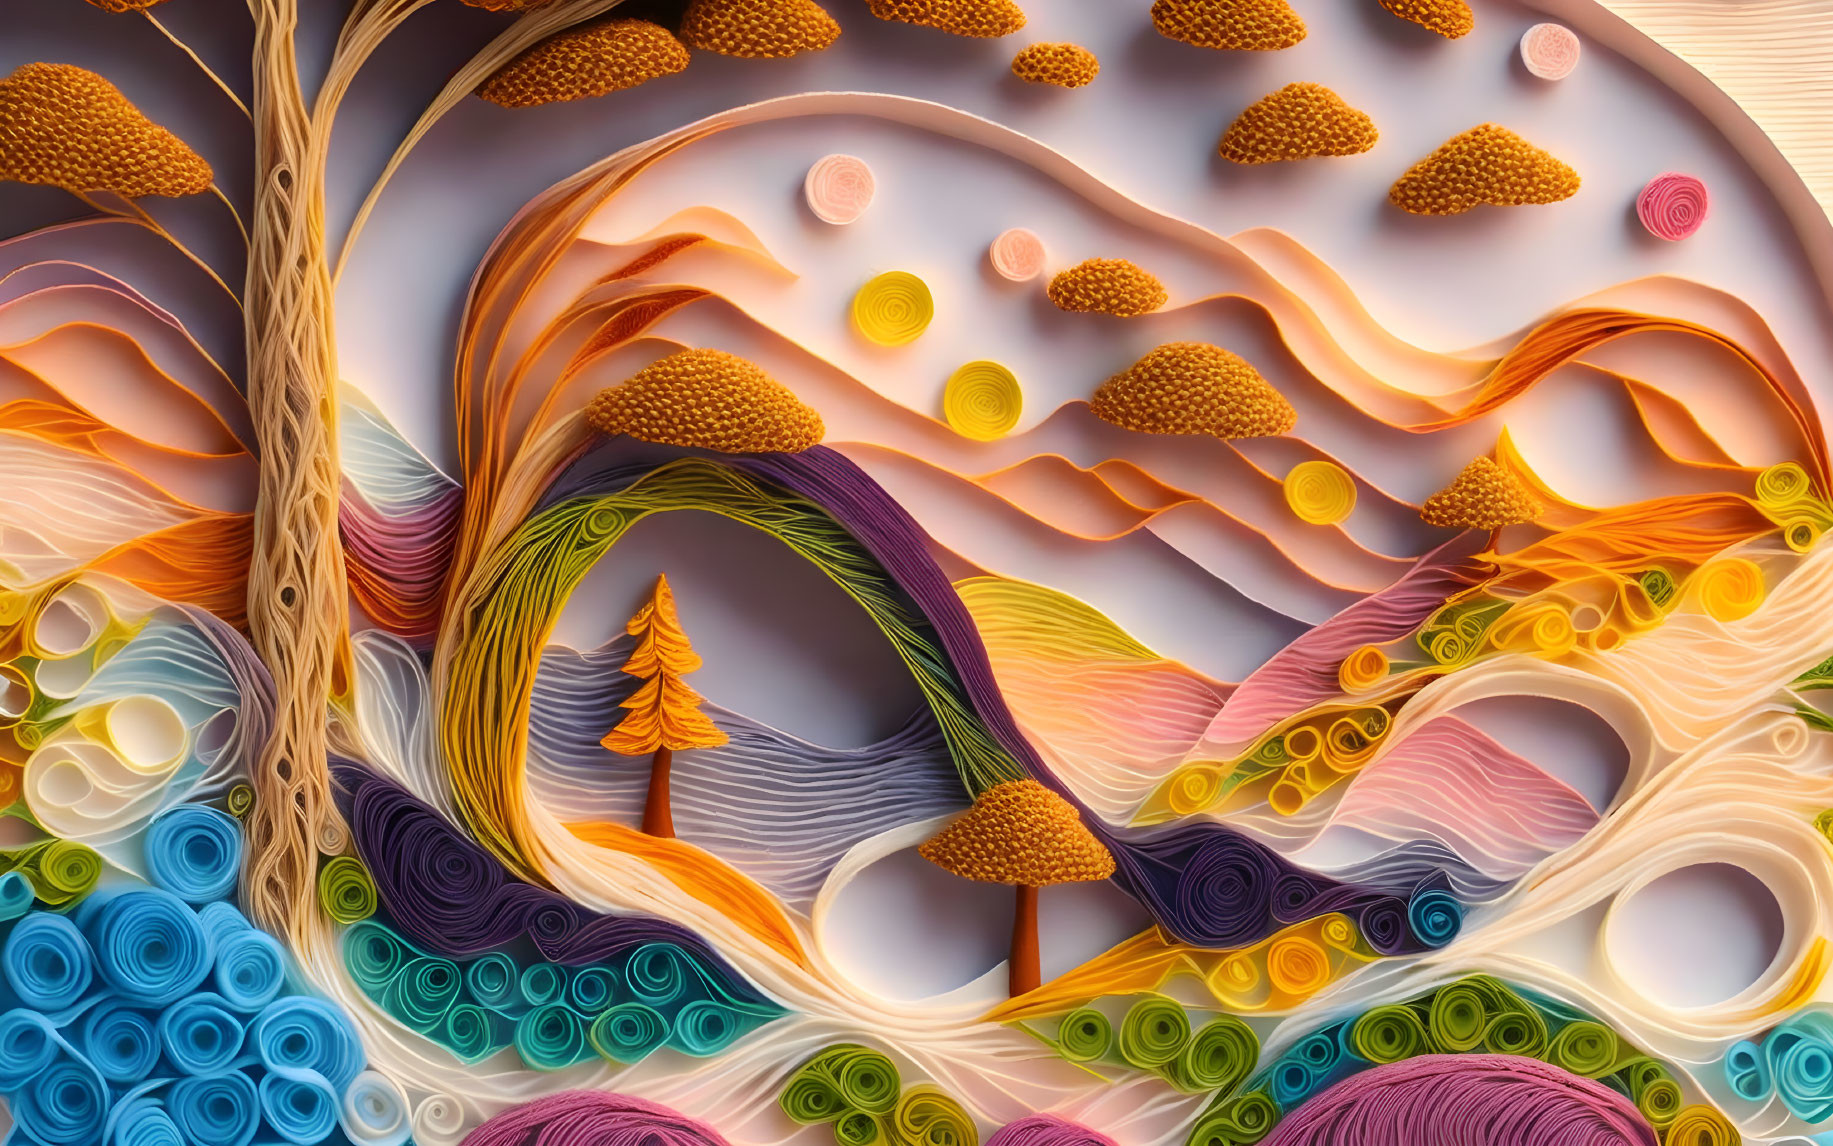 Abstract Paper Quilling Art: Whimsical Landscape with Trees and Swirling Patterns